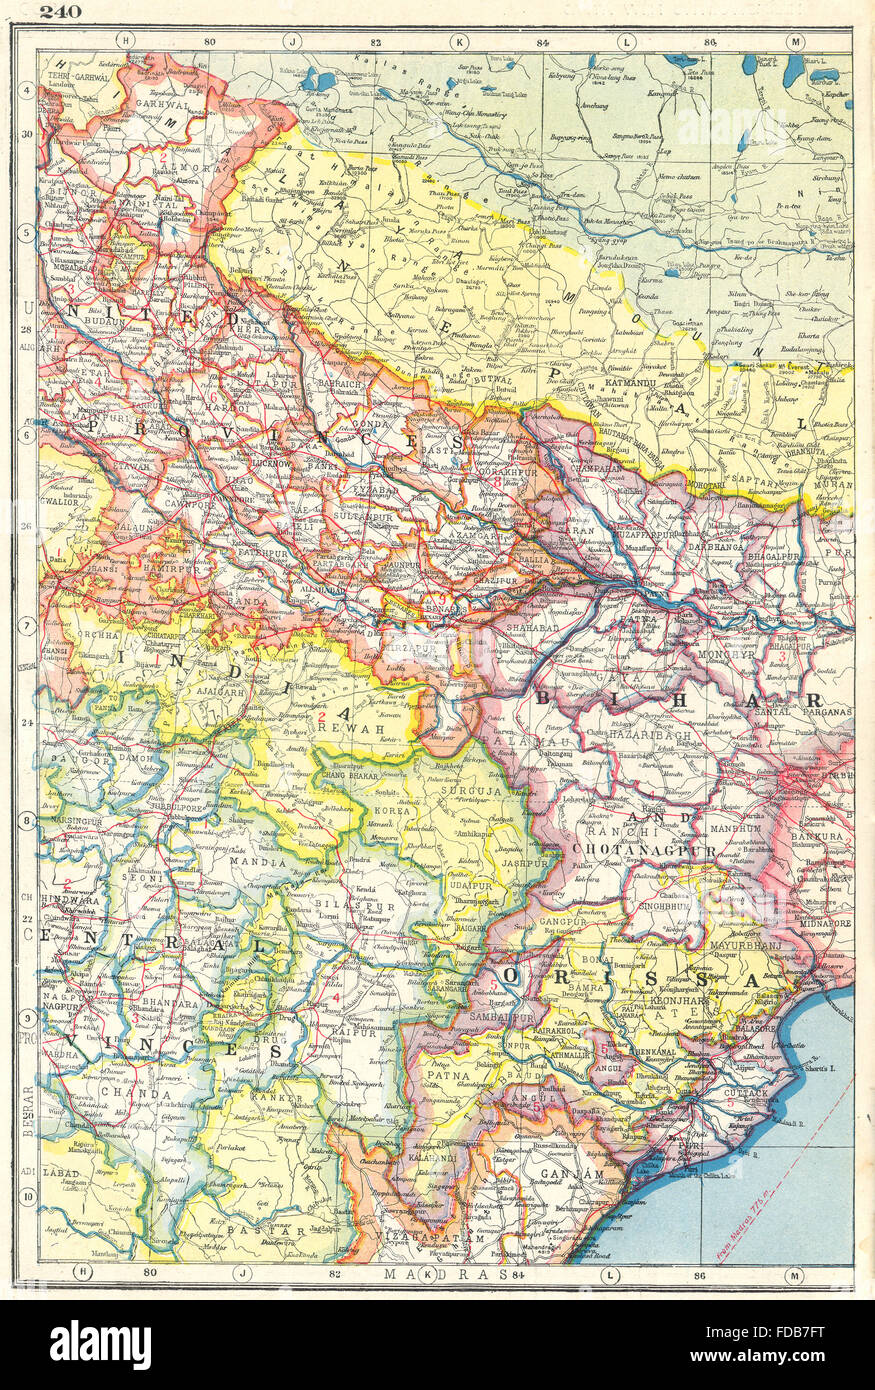 INDIA NORTH EAST: Orissa Bihar United & Central Provinces Nepal, 1920 old map Stock Photo